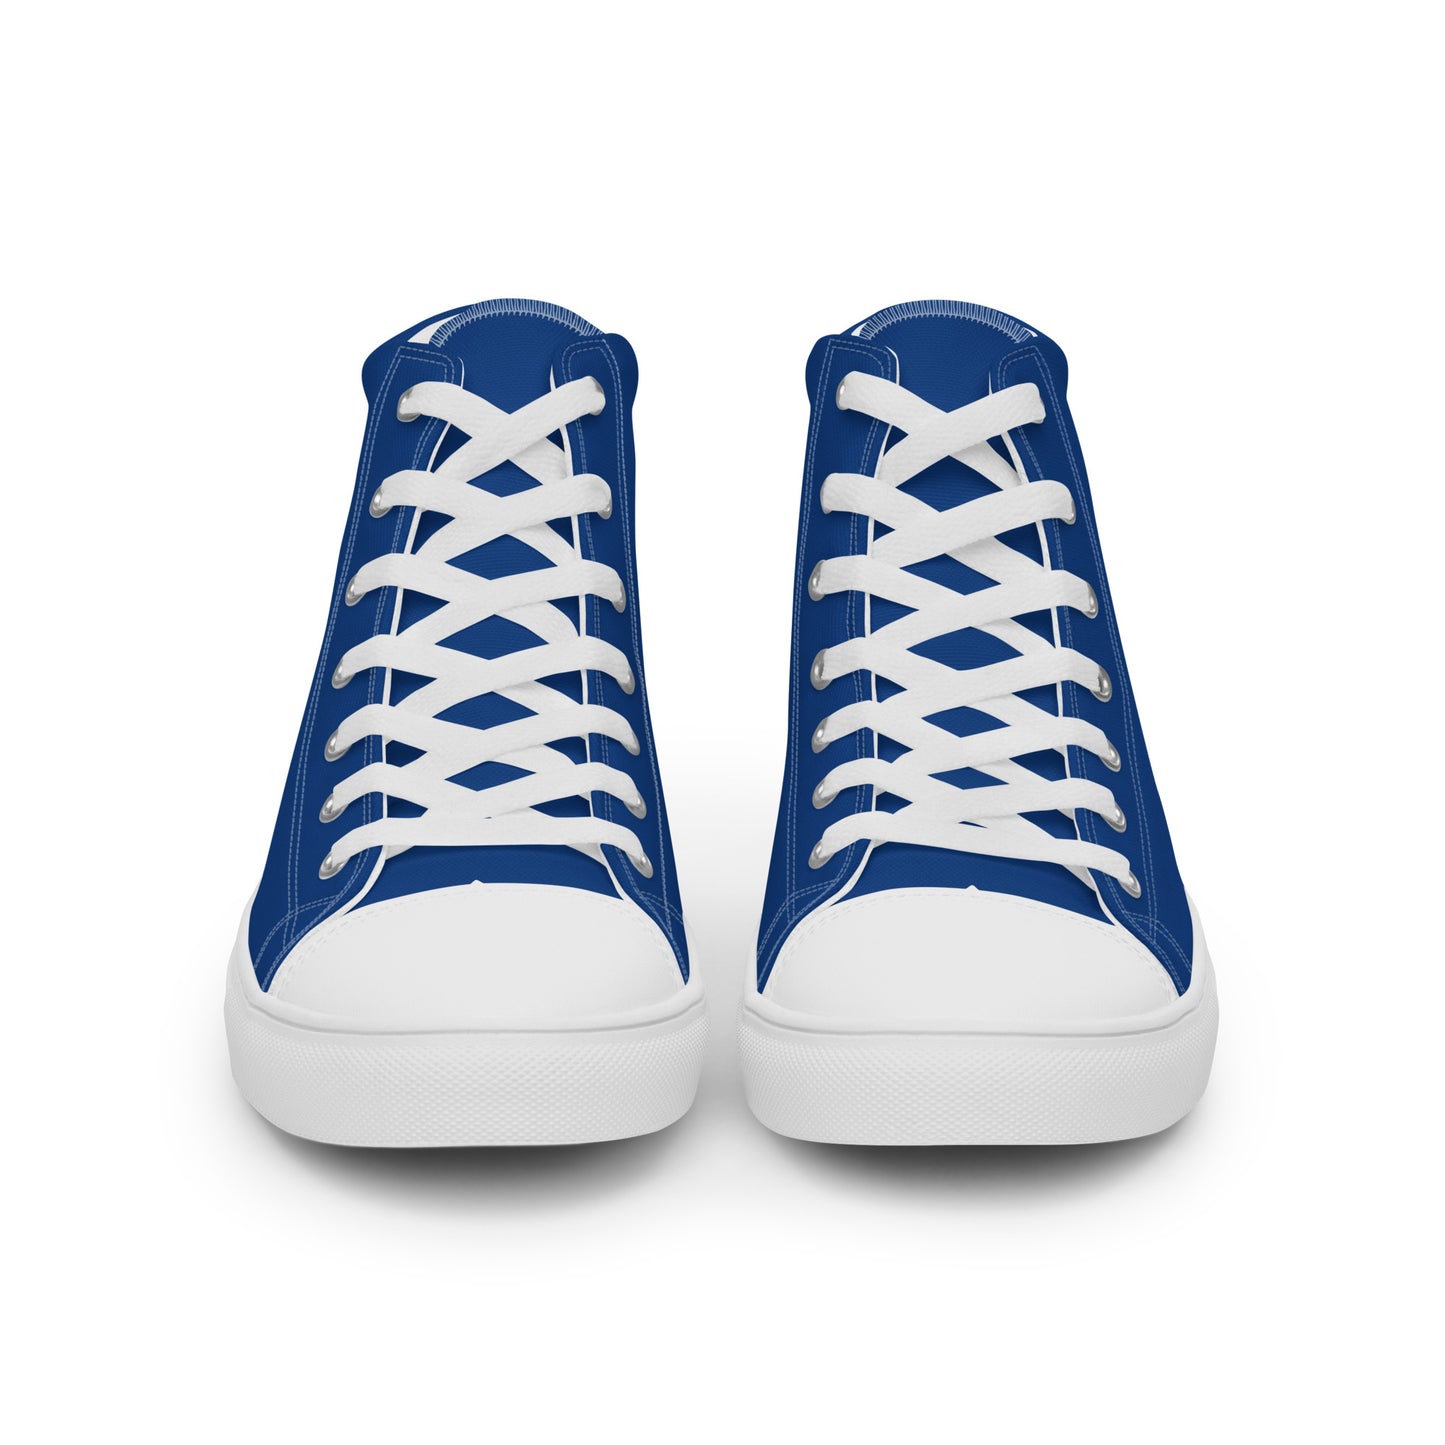 Chile - Women - Blue - High top shoes